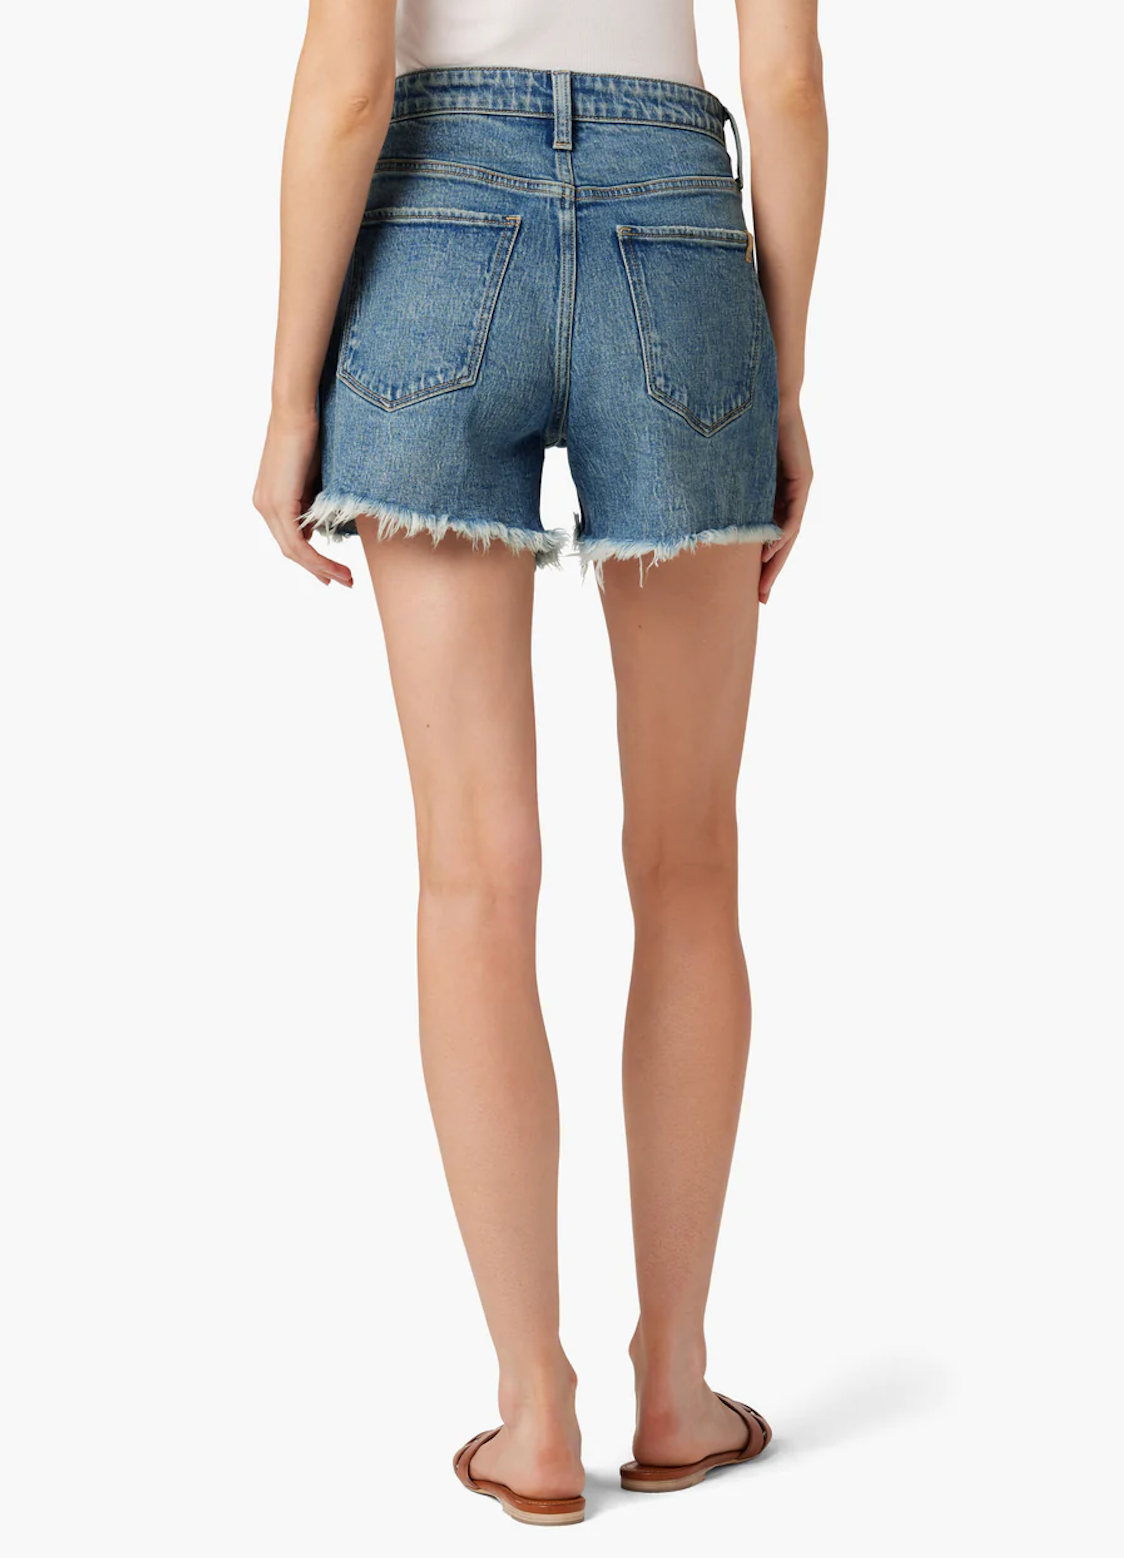 JOE'S JEANS JESSIE RELAXED SHORTS IN NOT YOUR BABE